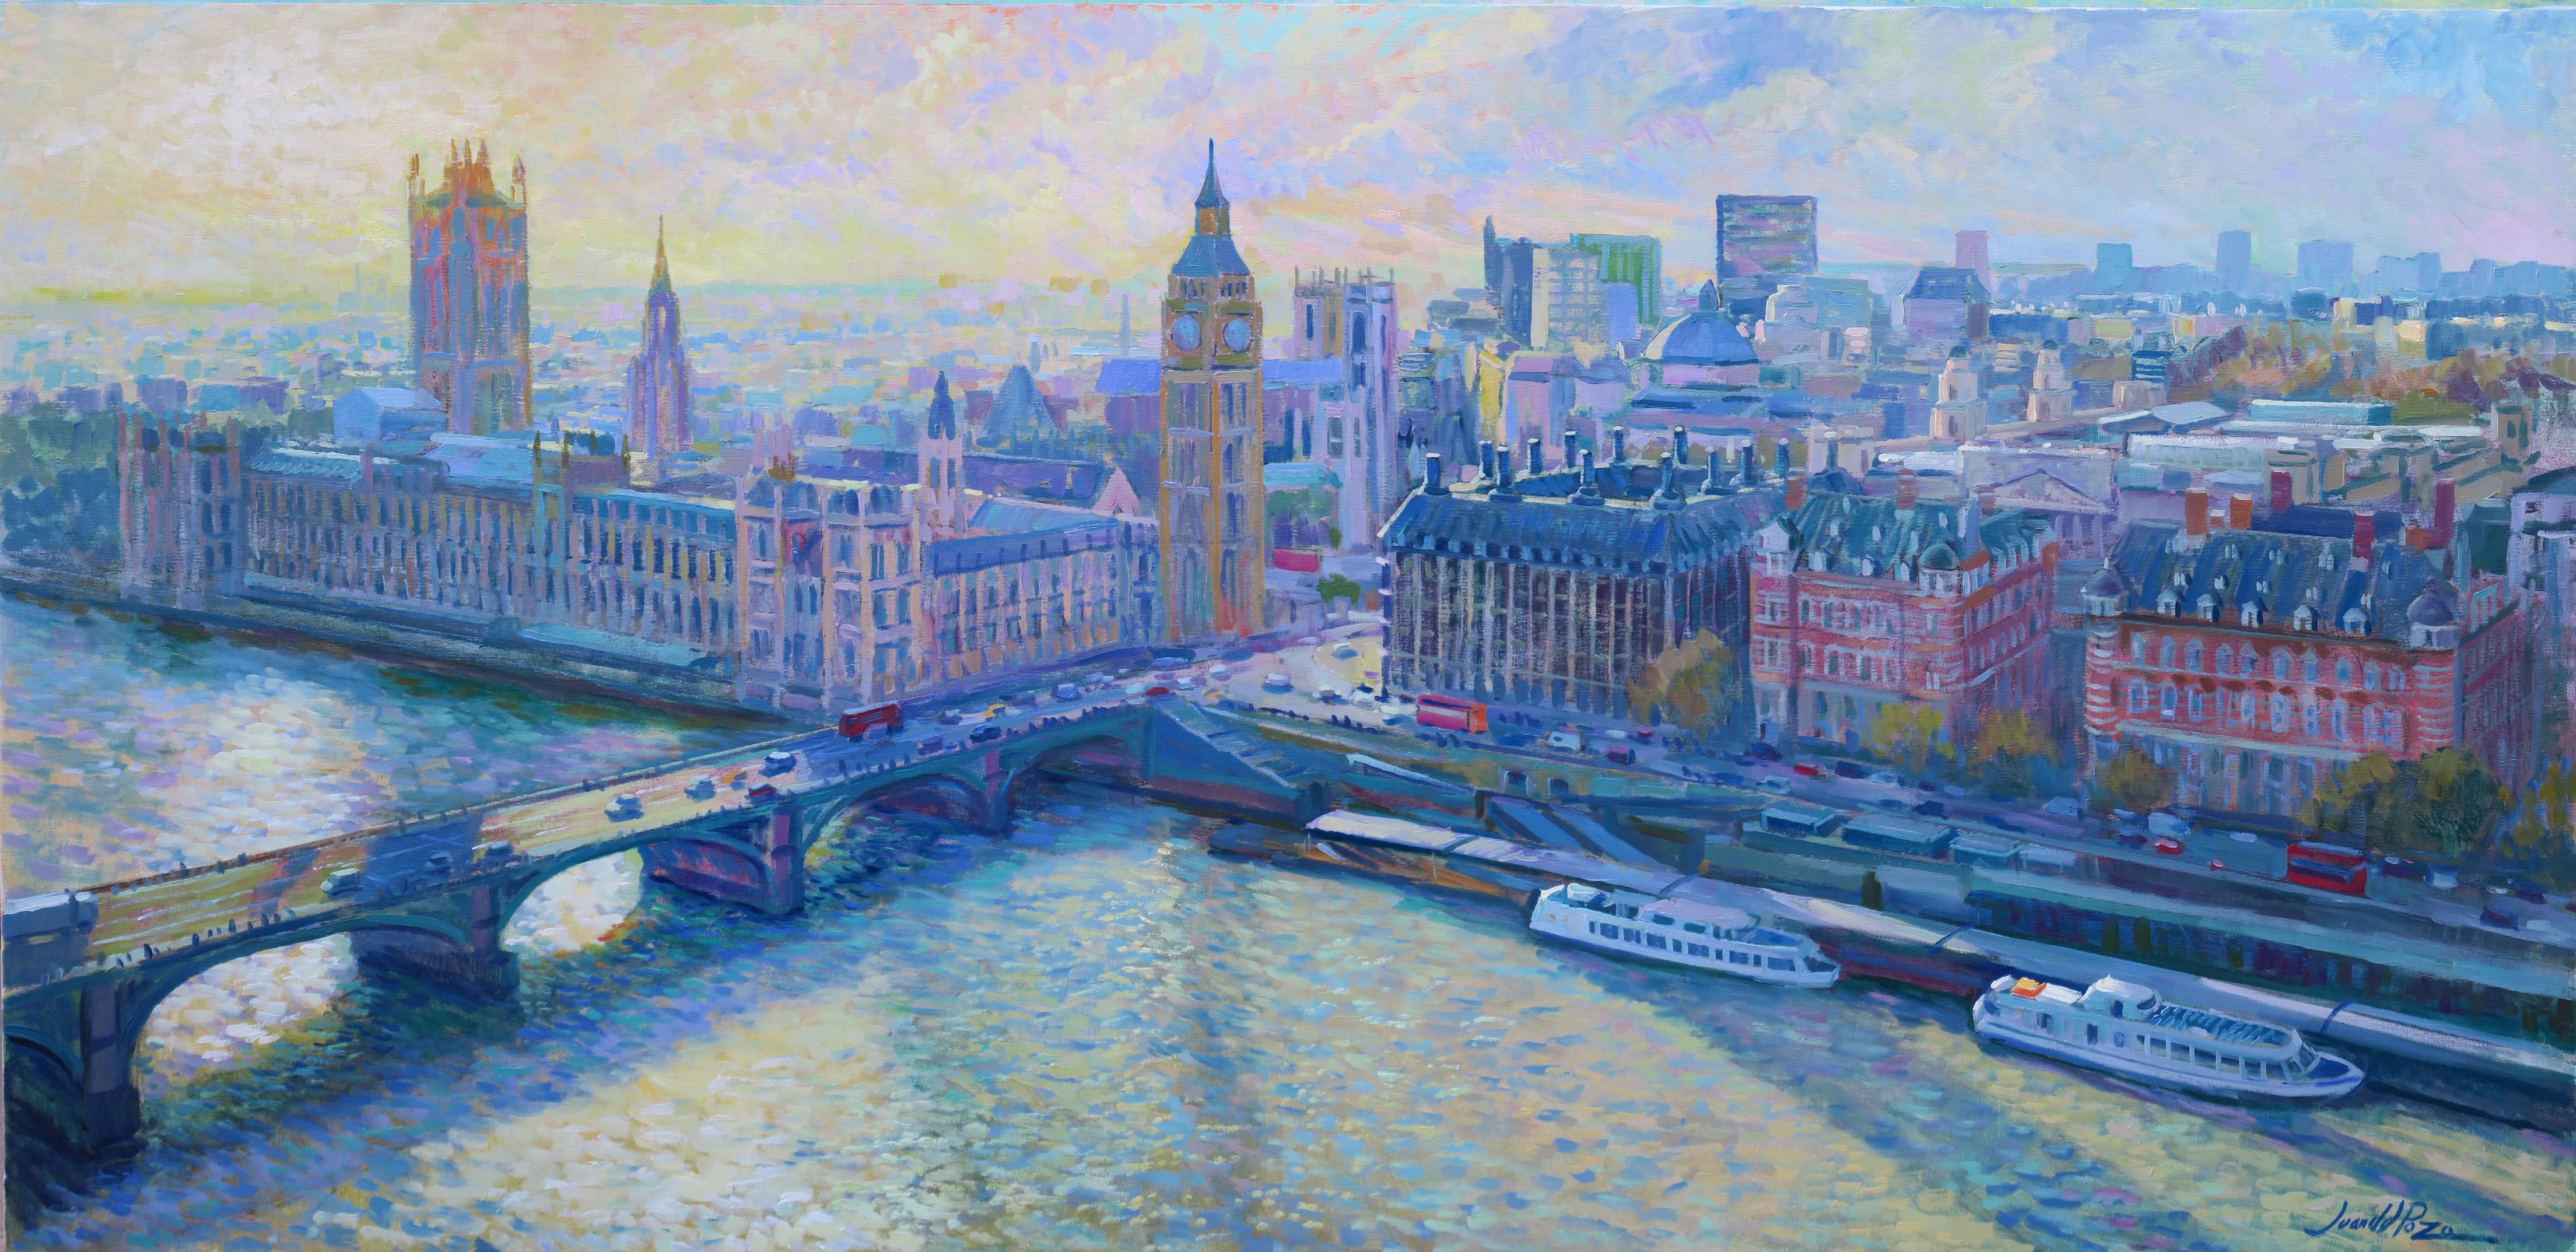 Juan del Pozo Abstract Painting - River Thames - original city London painting Contemporary art - 21st Century